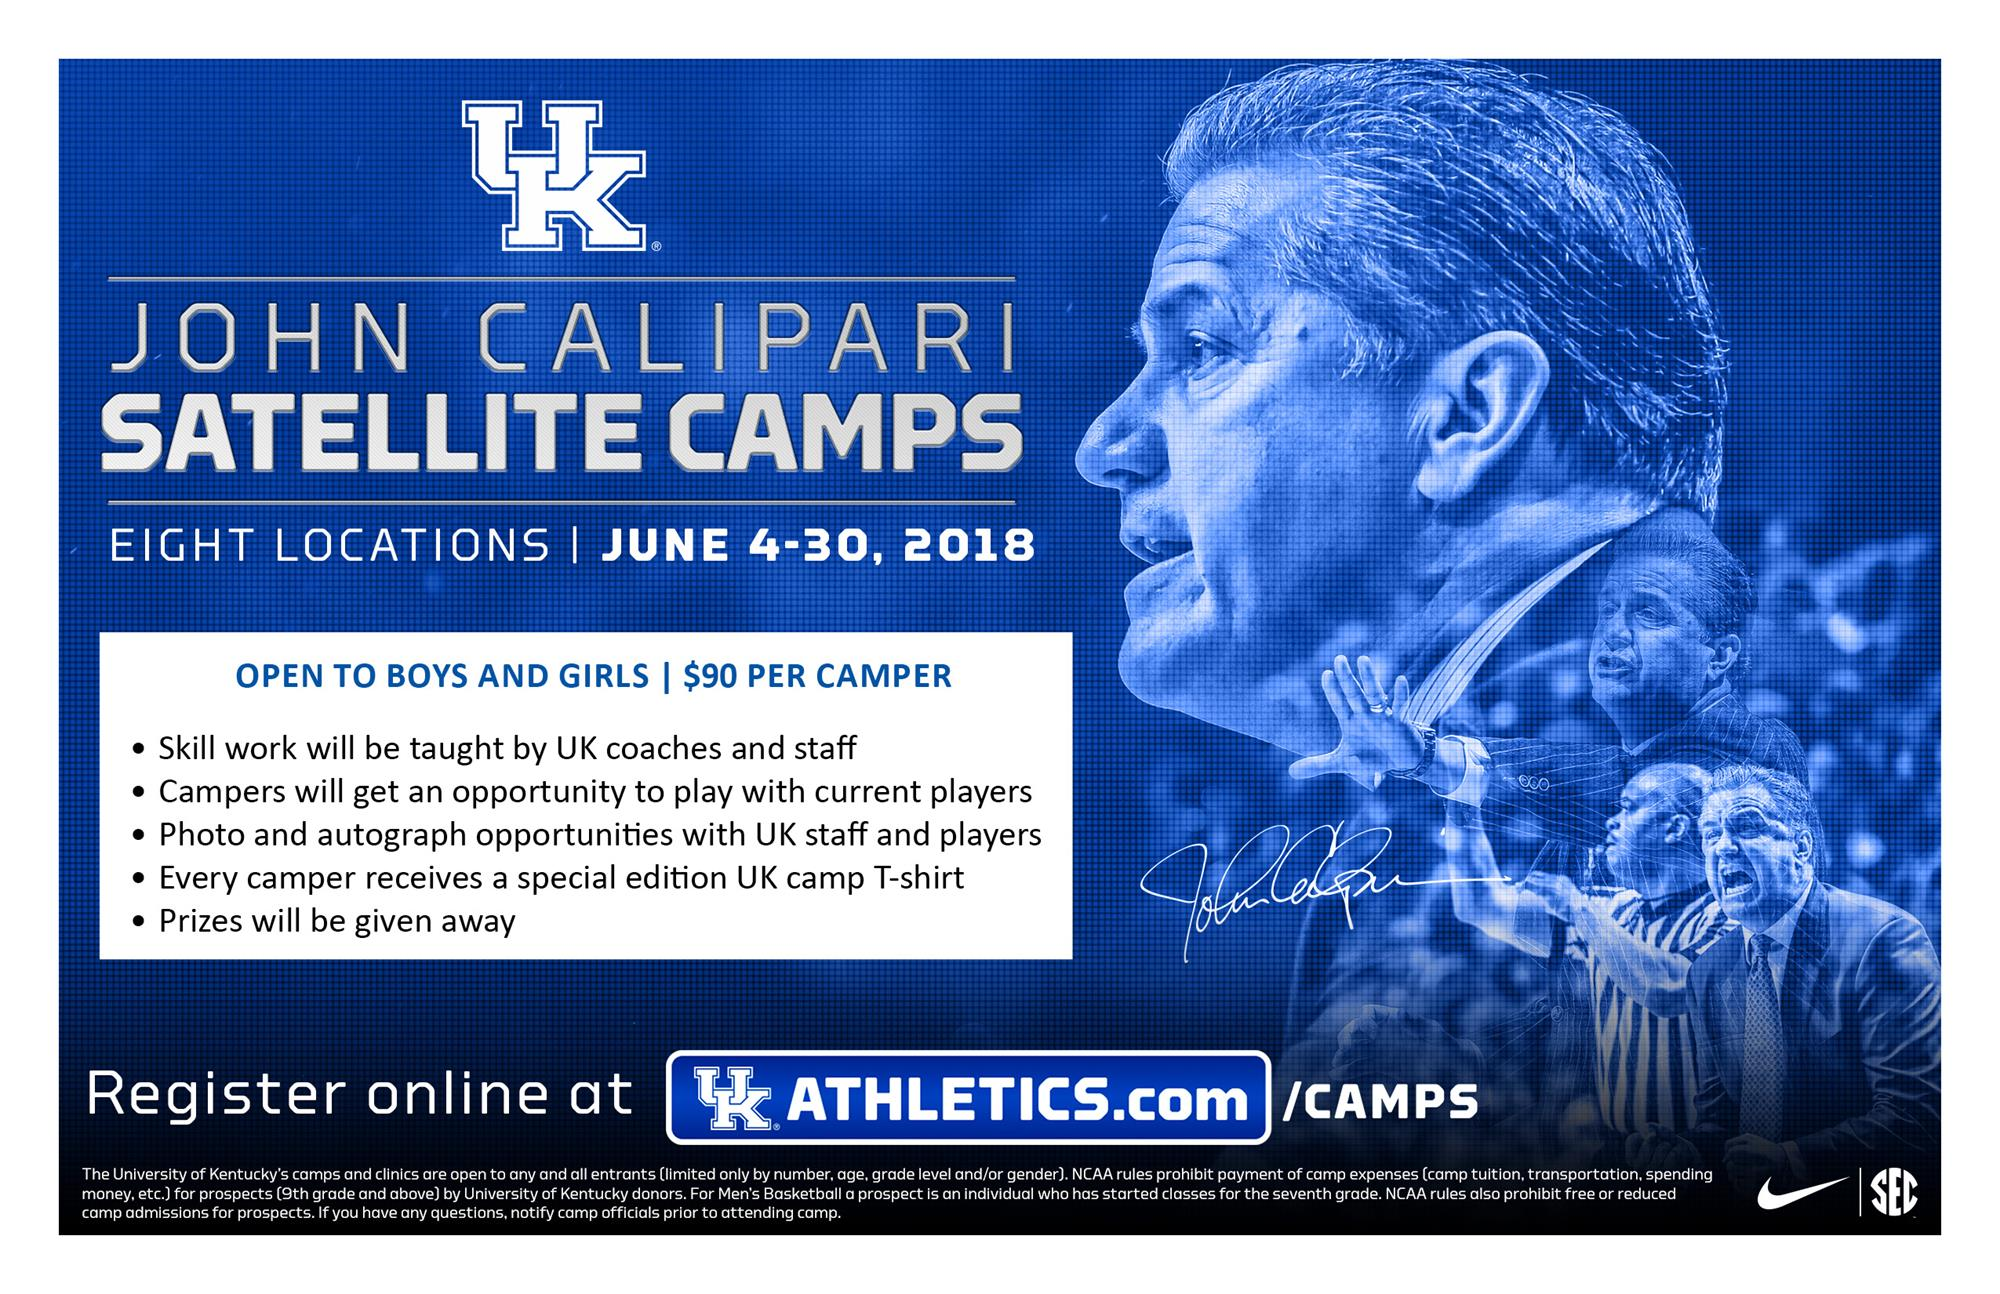 UK Men’s Basketball Adds Stops to Satellite Camp Tour